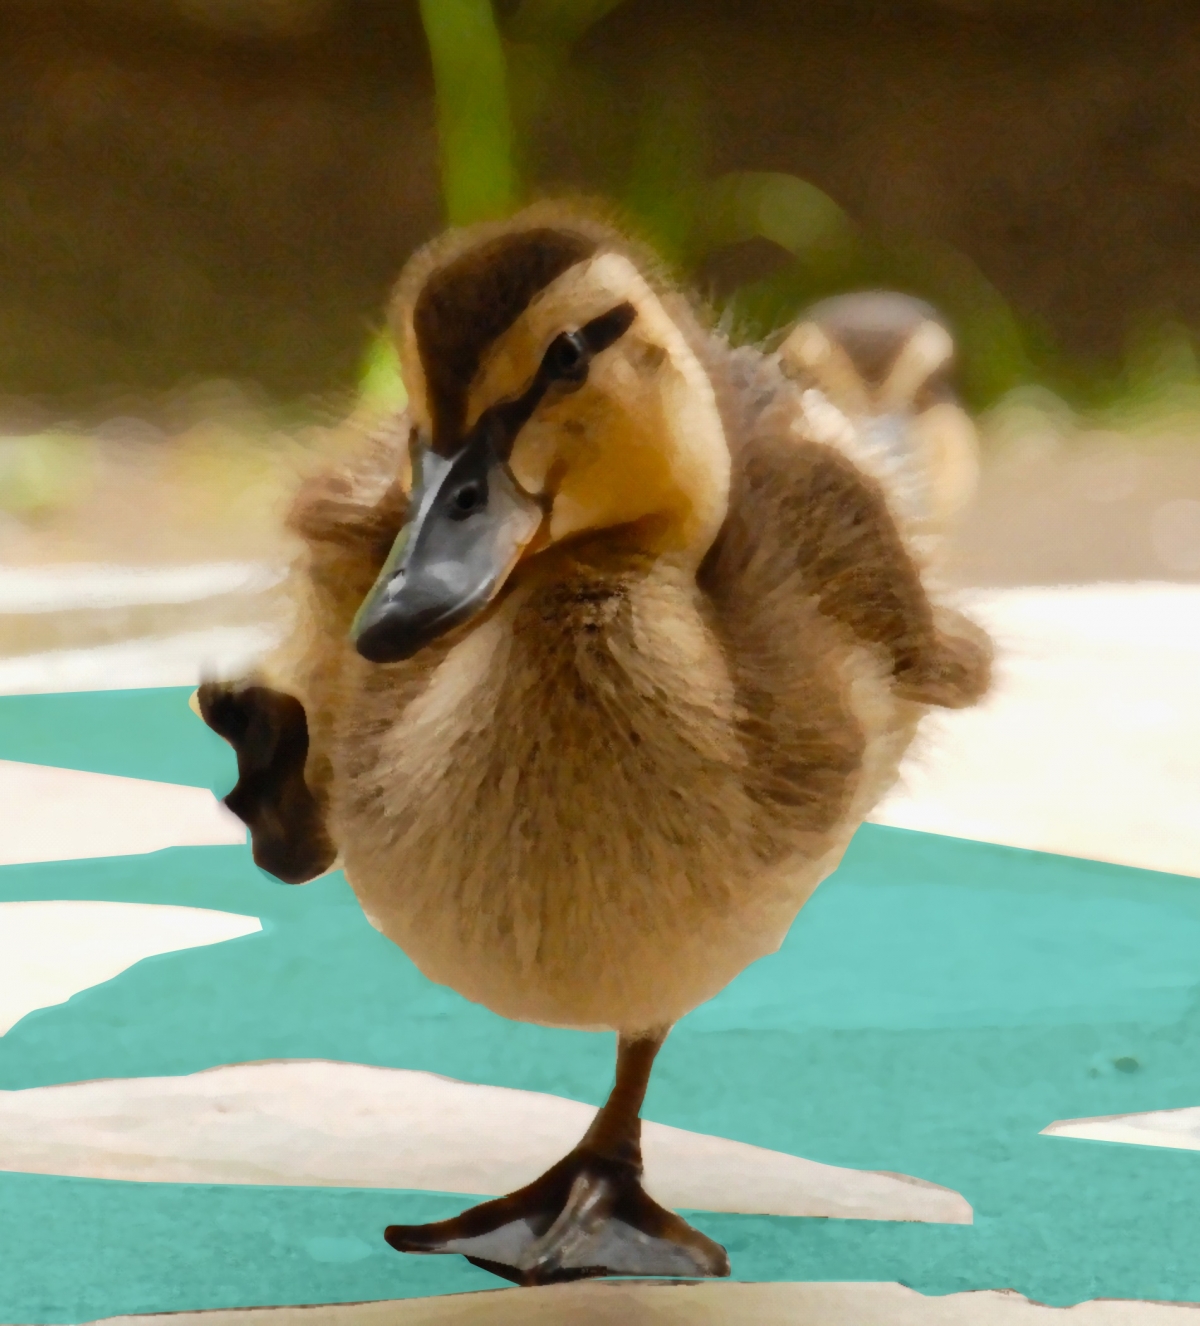 Duck taking a step